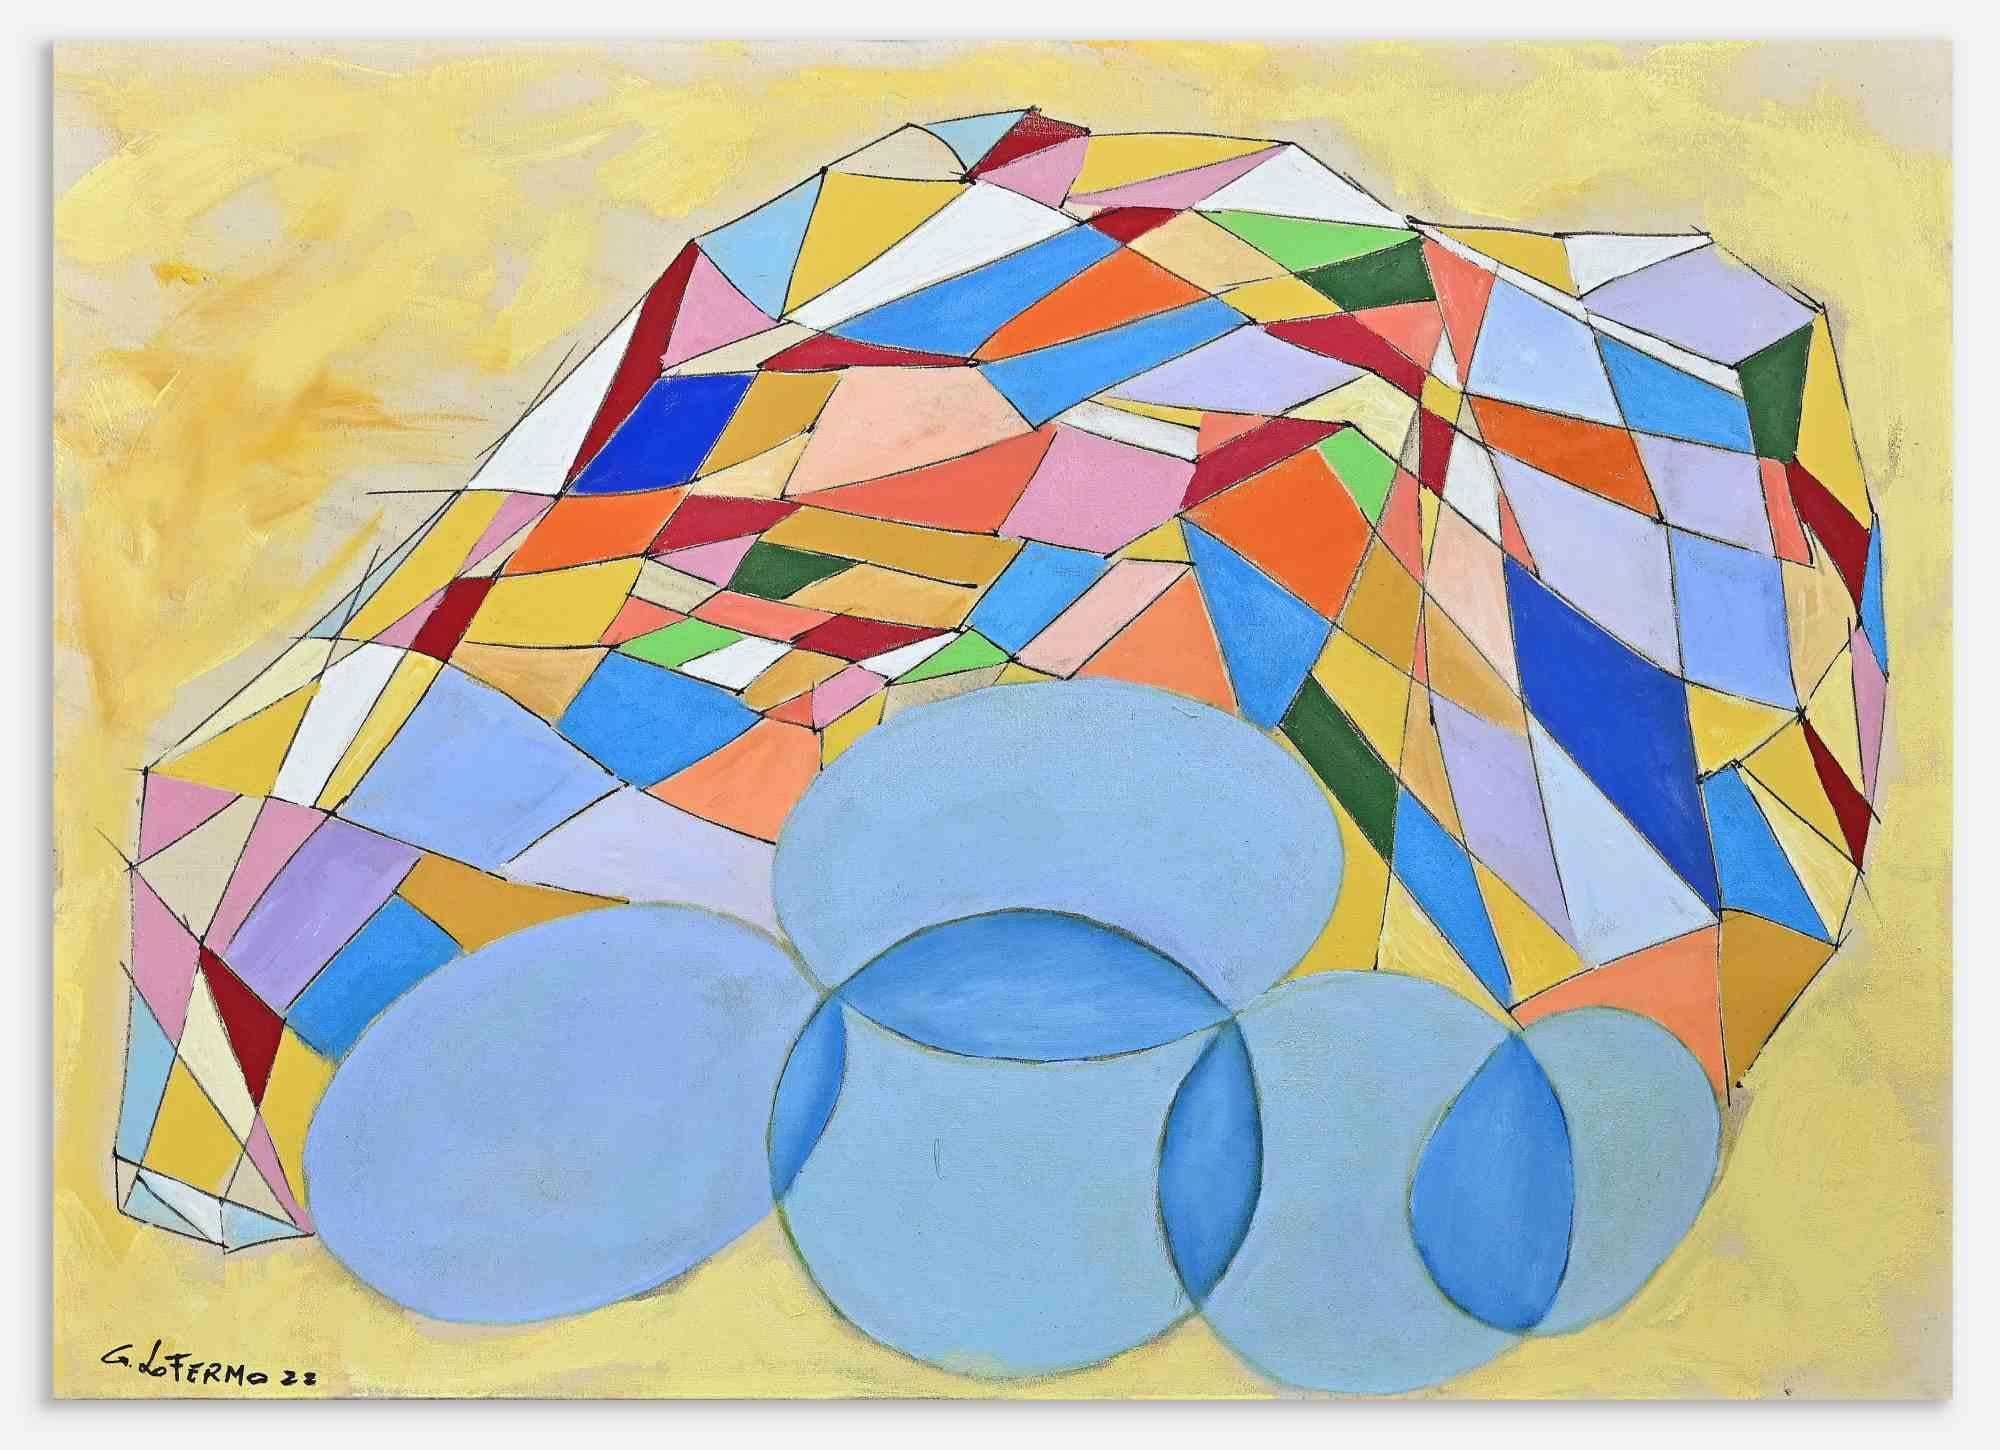 Abstract composition is an original artwork realized by Giorgio Lo Fermo (b. 1947) in 2022

Original Oil Painting on Canvas.

Hand signed and dated on the lower left margin.

Hand-signed, titled and dated on the back of the canvas.

Good